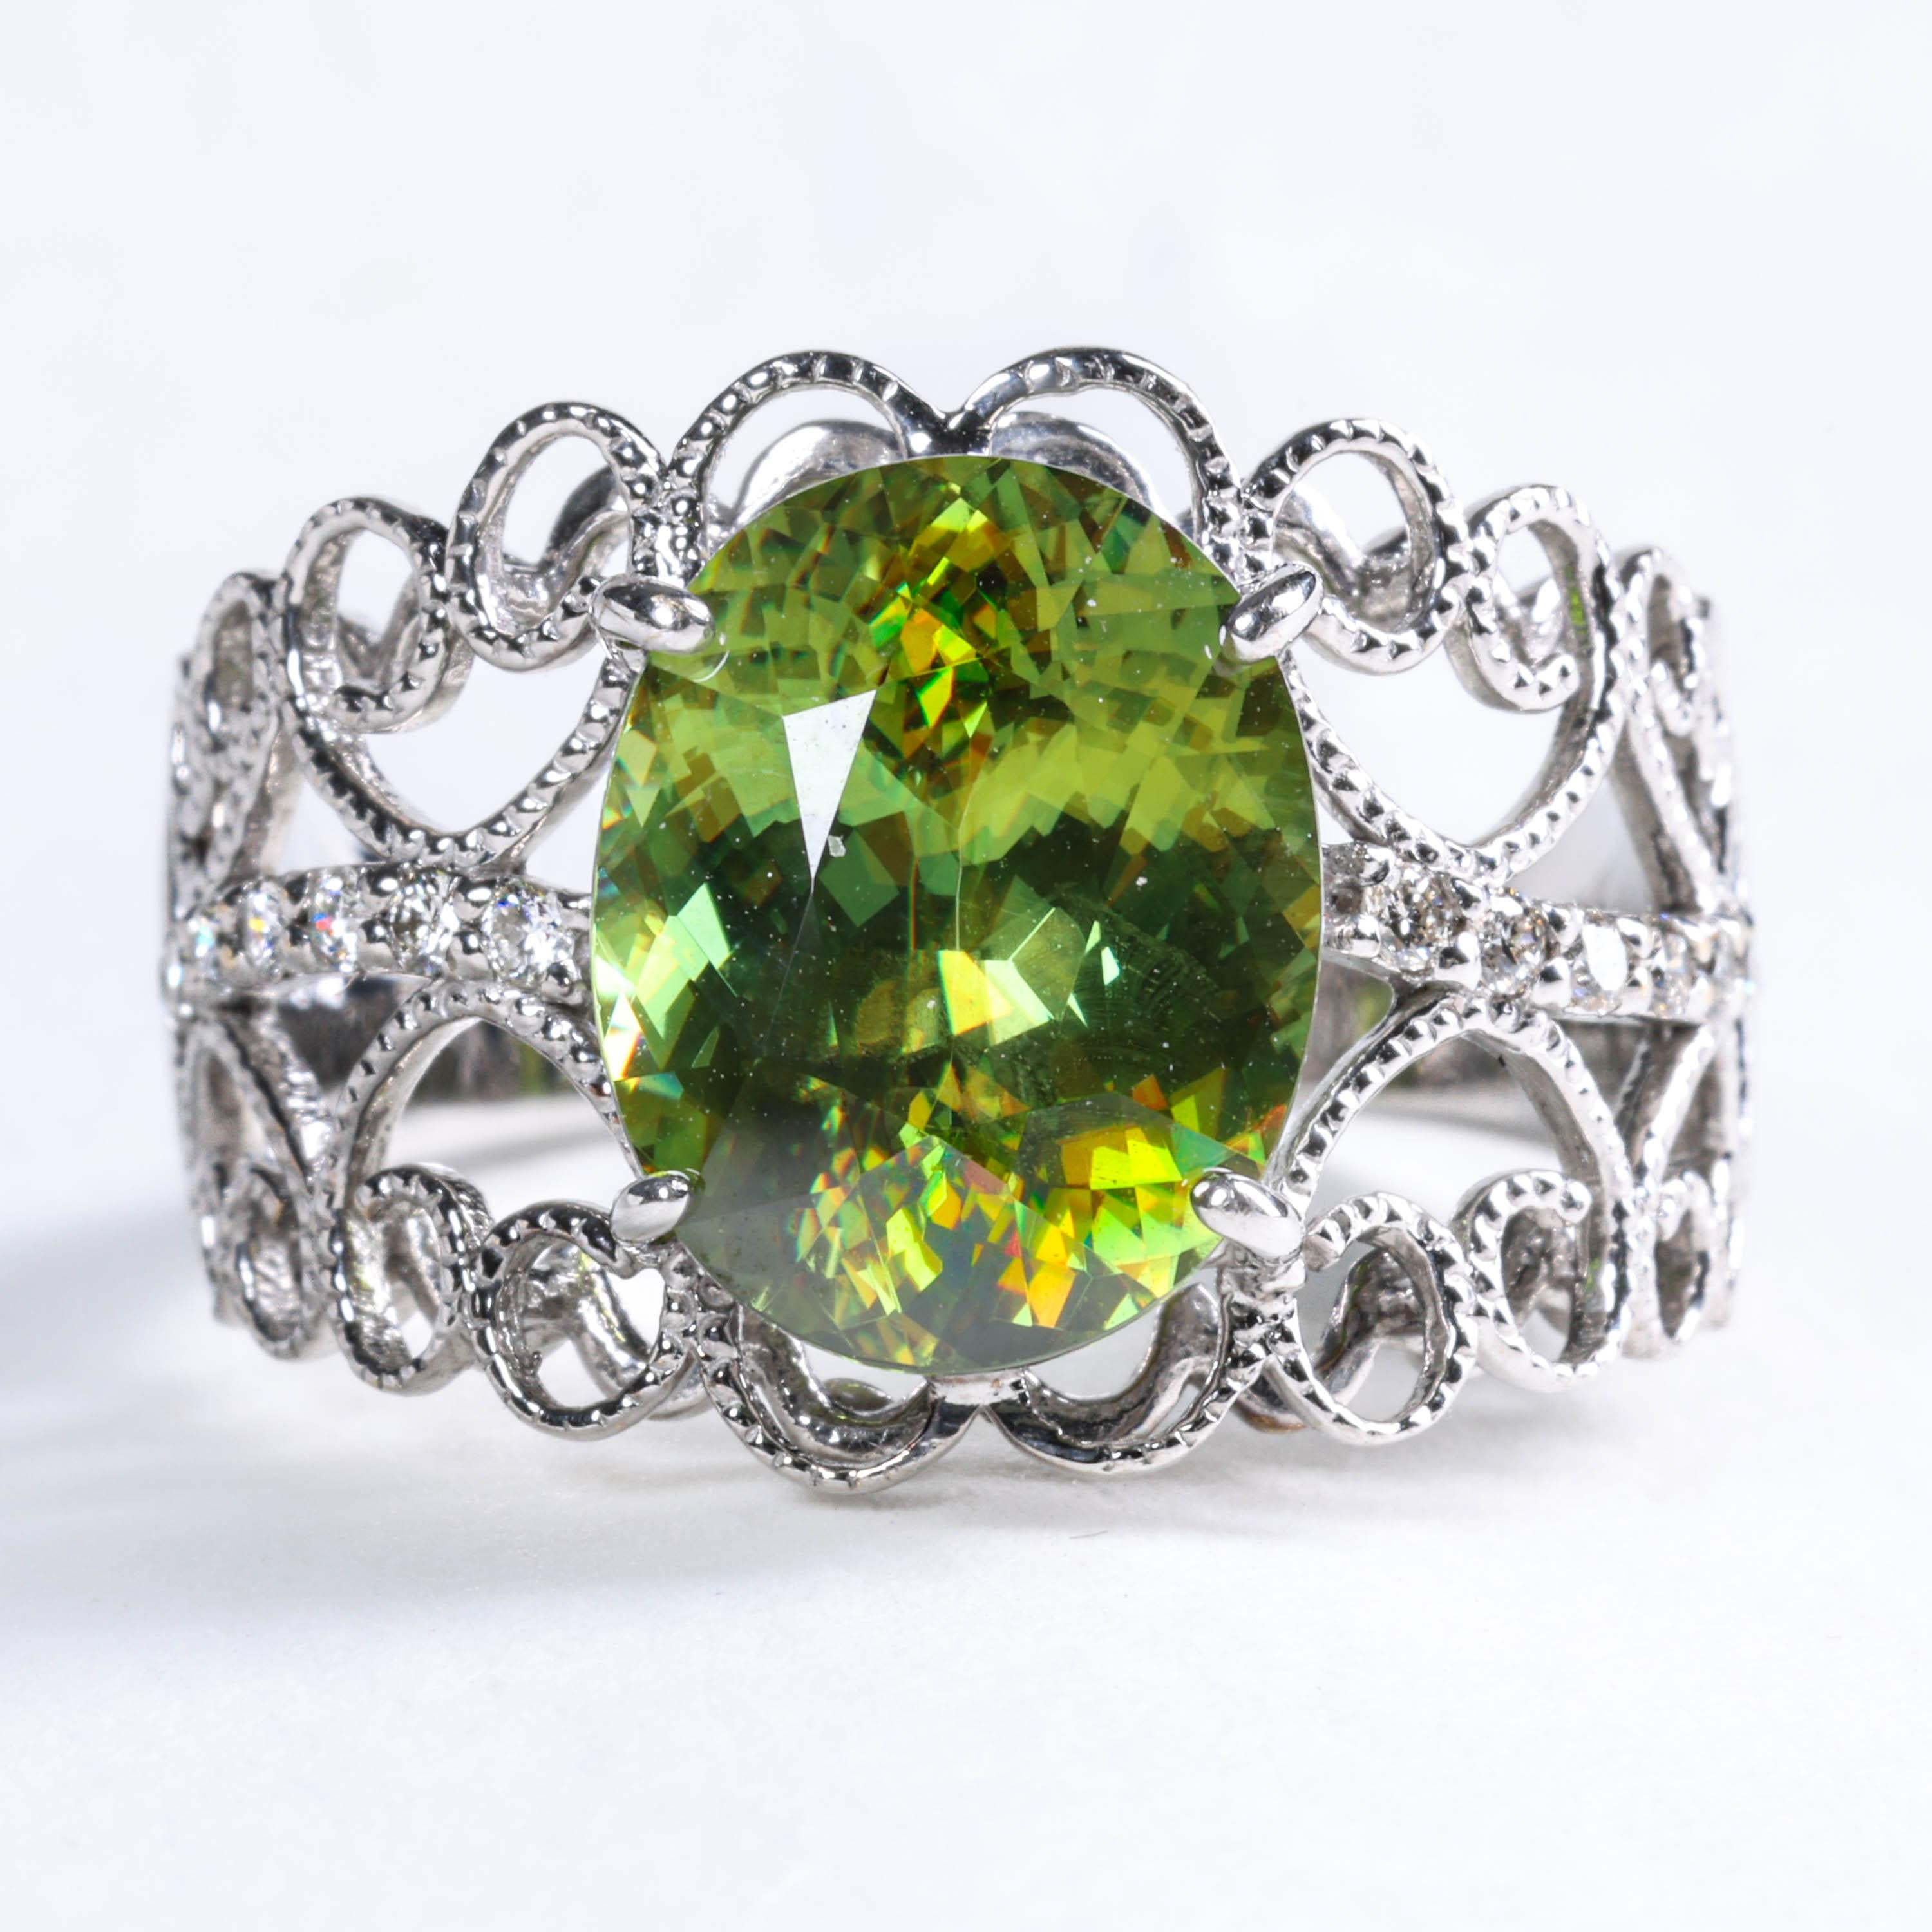 This gorgeous one-of-a-kind ring features a rare gem known by two names: sphene or titanite. From a 3/4 angle in low light, it looks like the finest peridot gem. But add some light and it's fire rivals the finest diamond. Move your hand even the